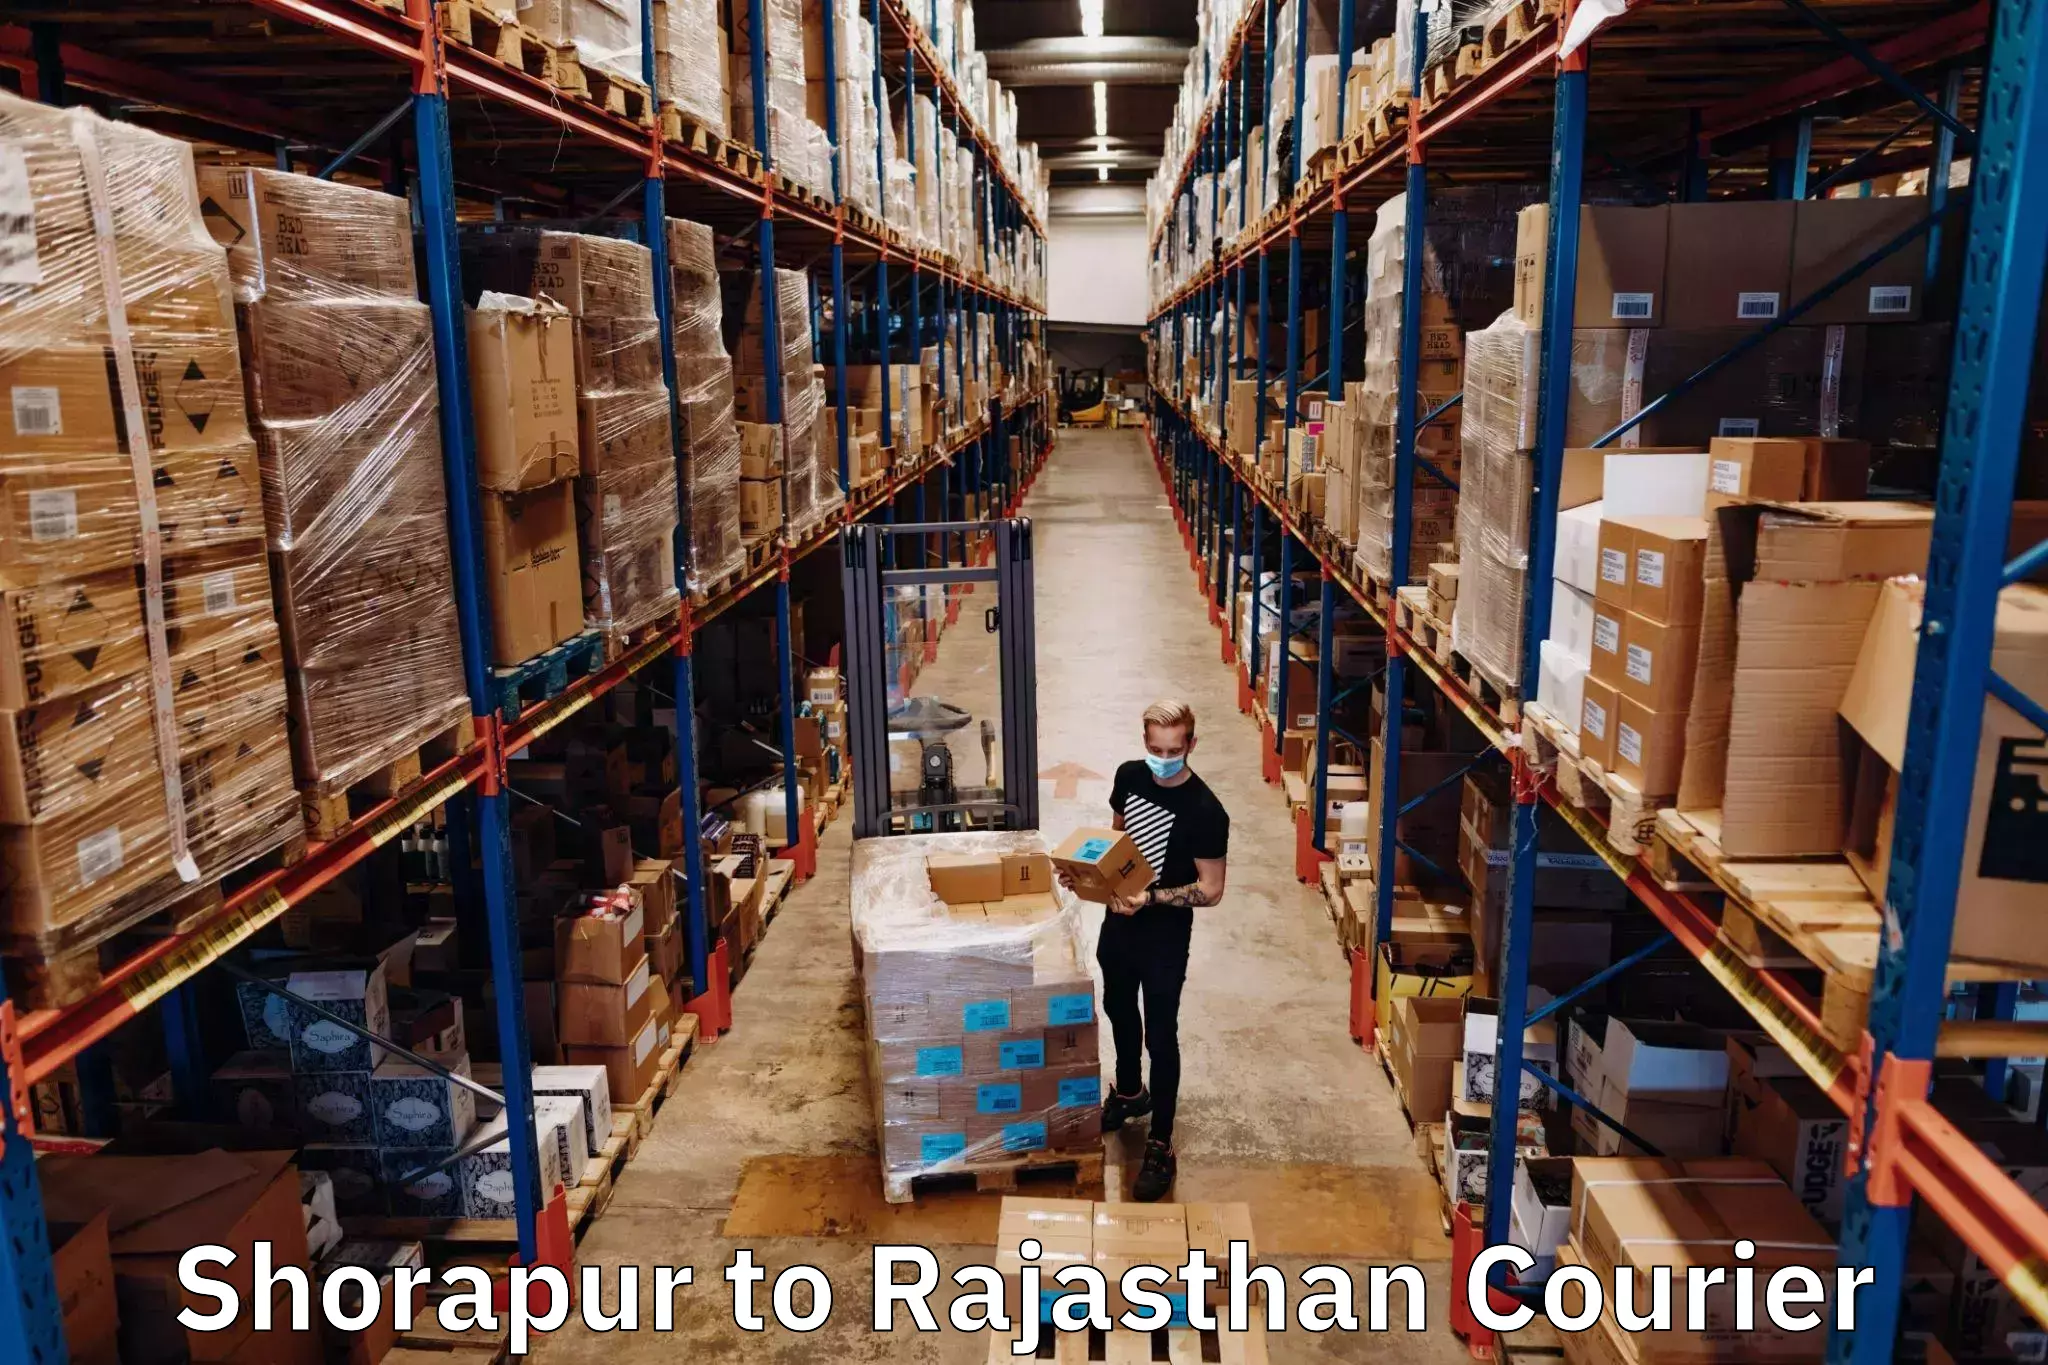 Next-day delivery options in Shorapur to Deogarh Rajsamand